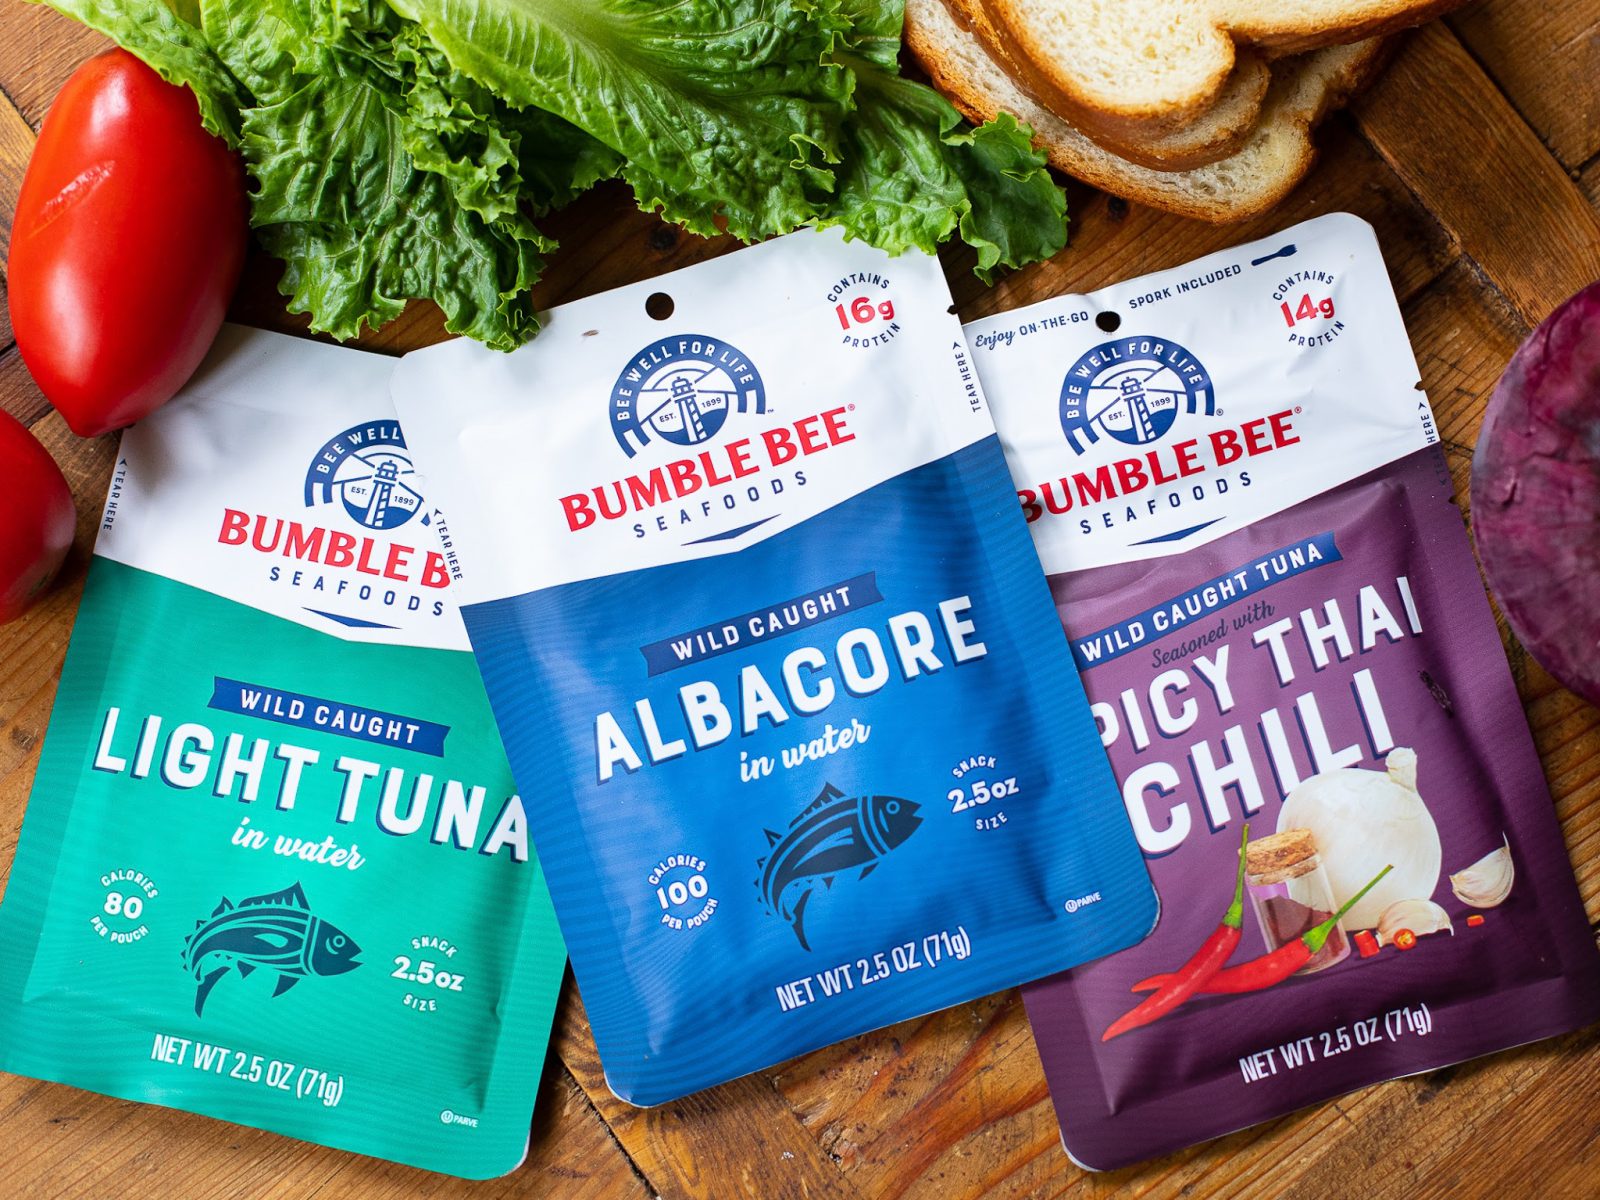 Bumble Bee Tuna Pouches As Low As 75¢ At Publix